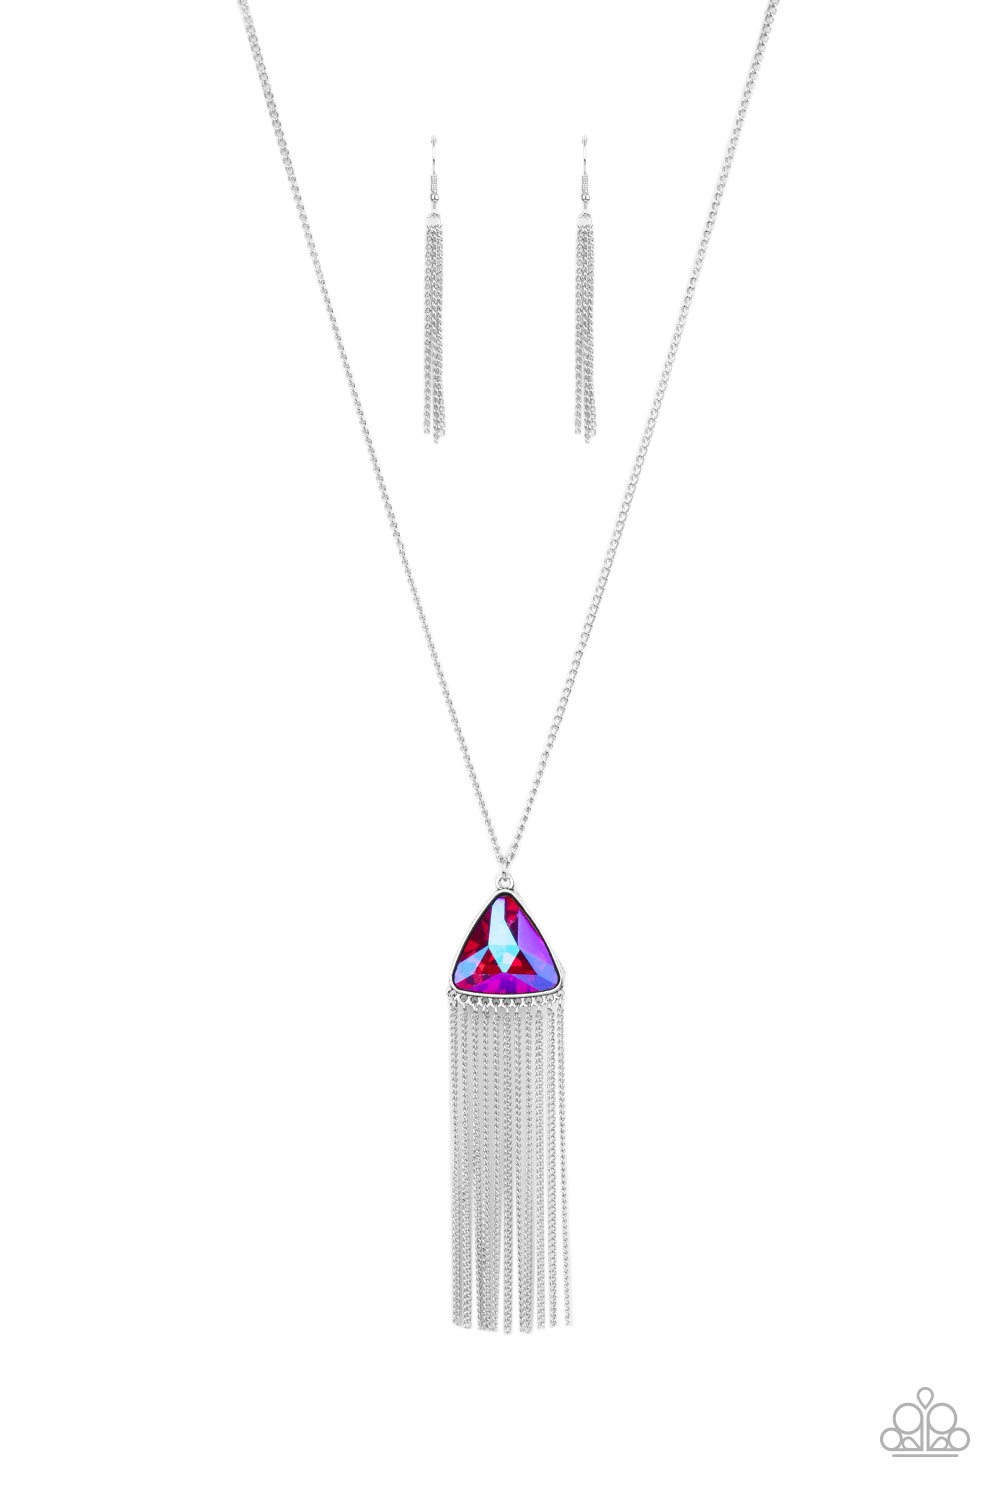 Proudly Prismatic - Pink iridescent necklace